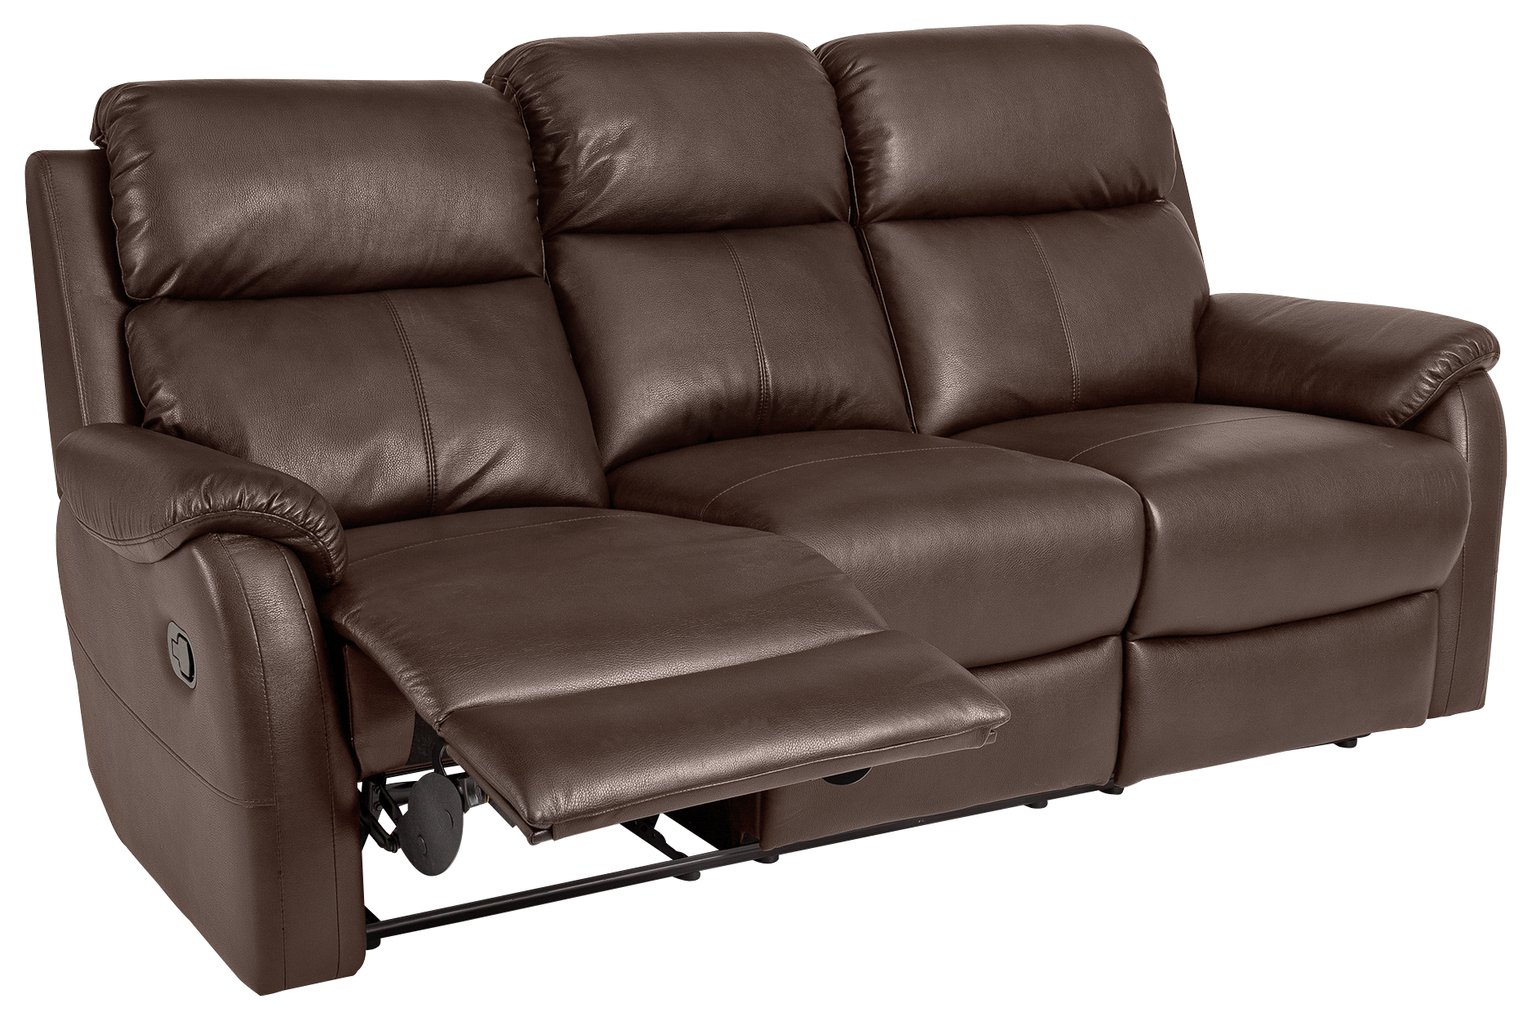 Argos Home Tyler 3 Seater Leather Eff Recliner Sofa Reviews